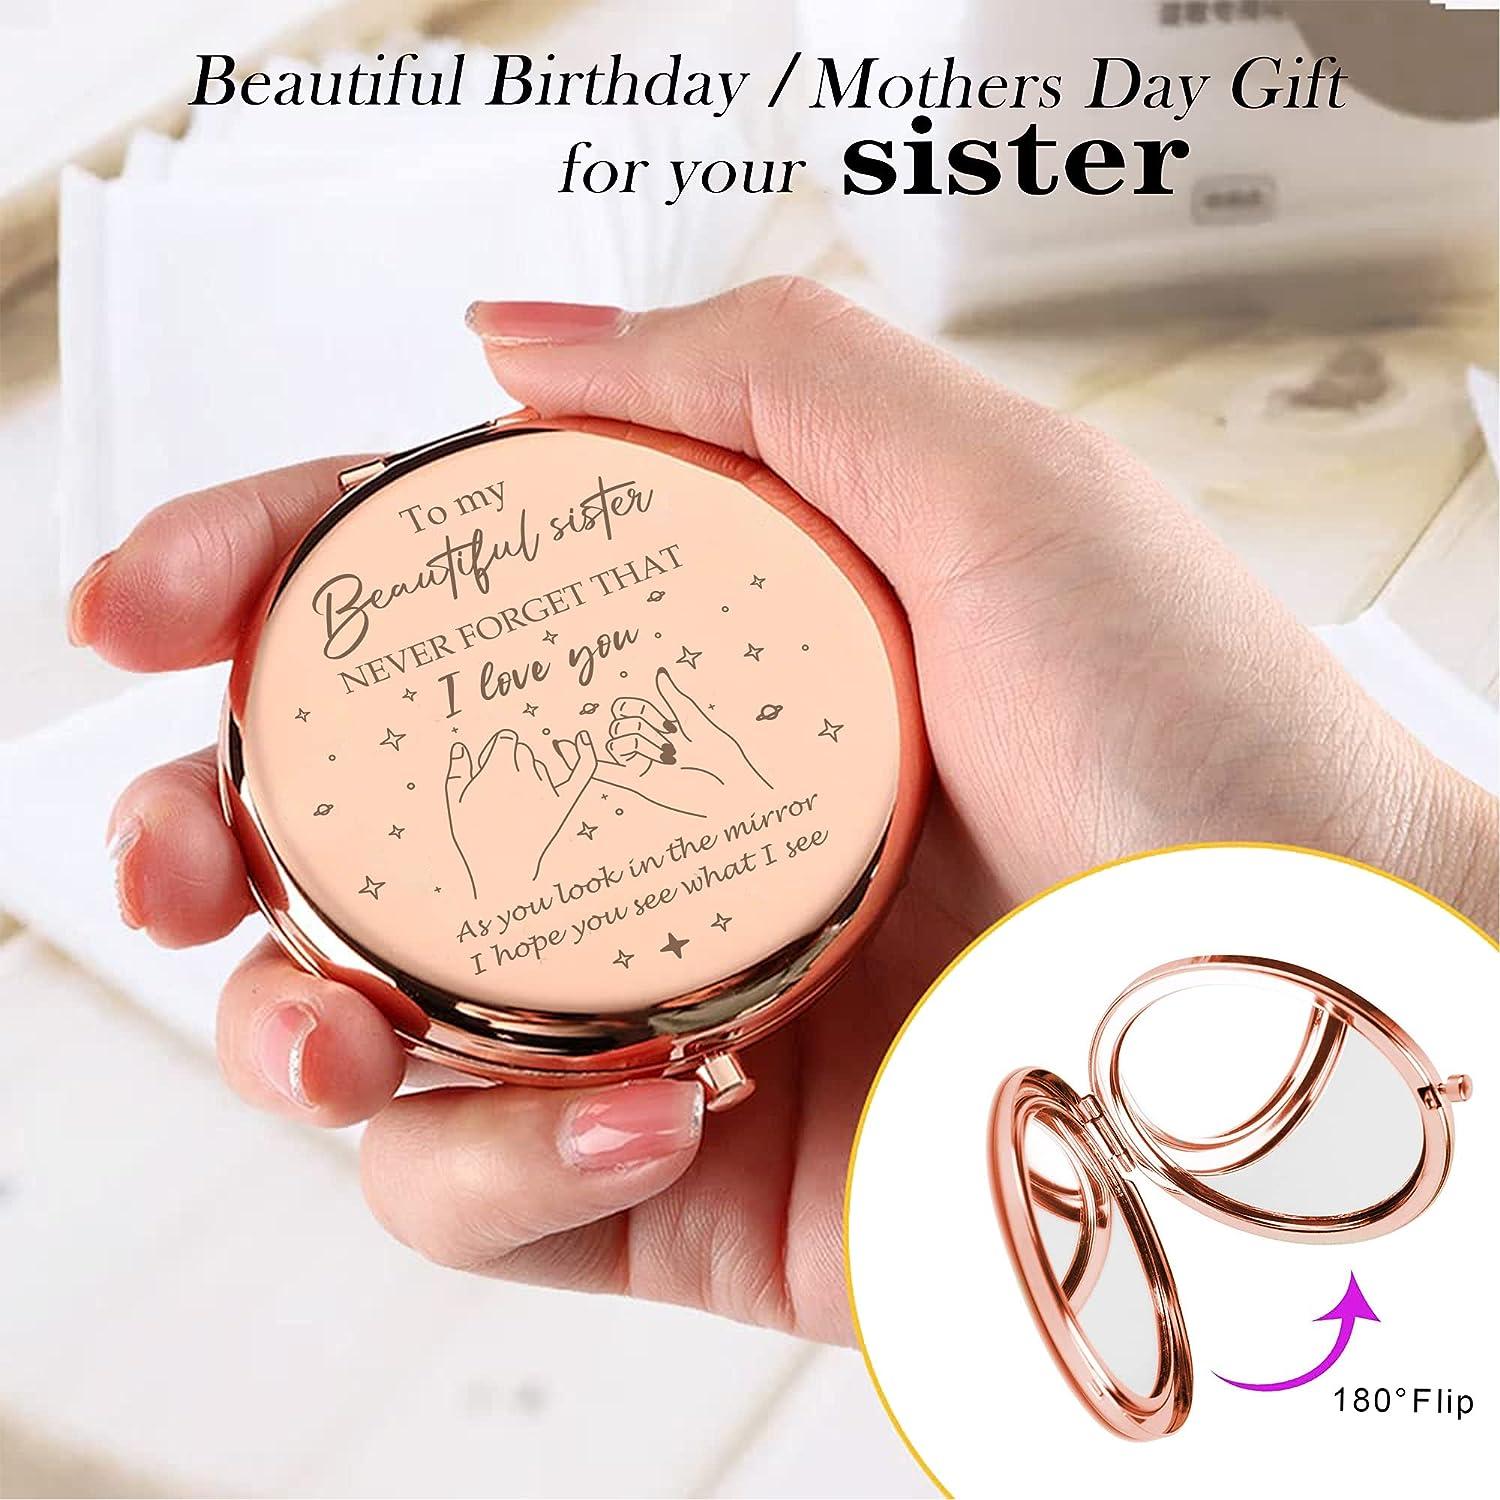 Best 30th Birthday Gift Ideas for Sisters [15+ Ideas]